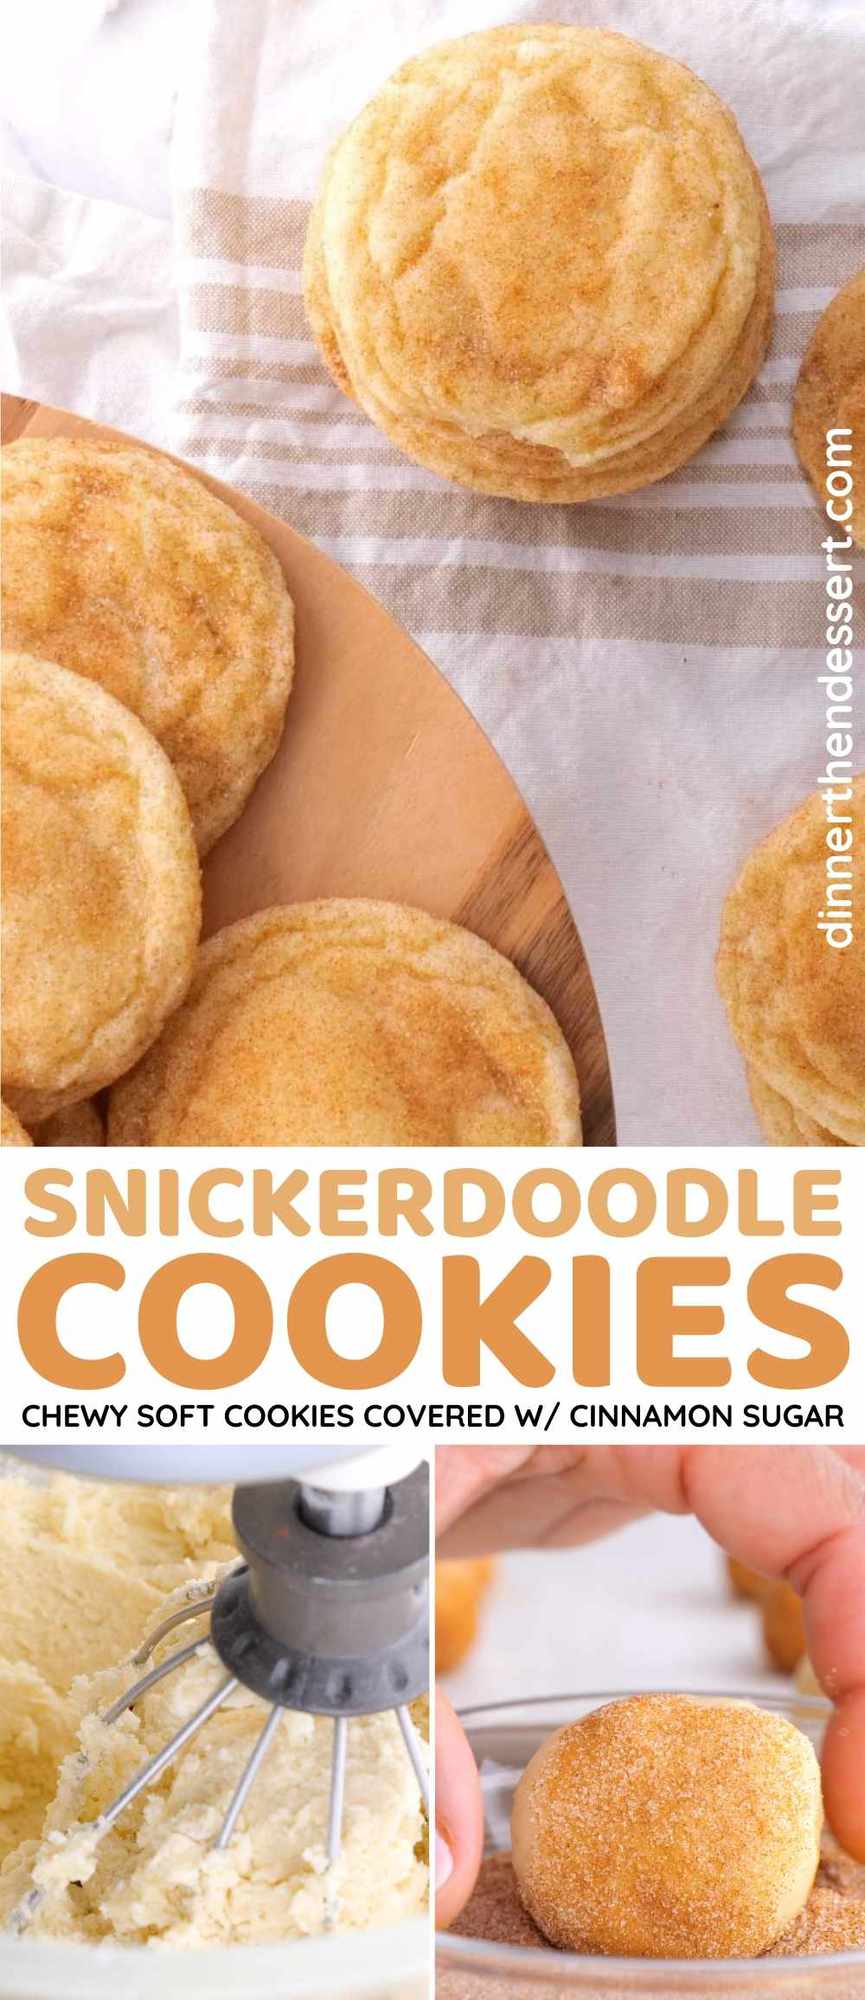 Snickerdoodle Cookies Collage